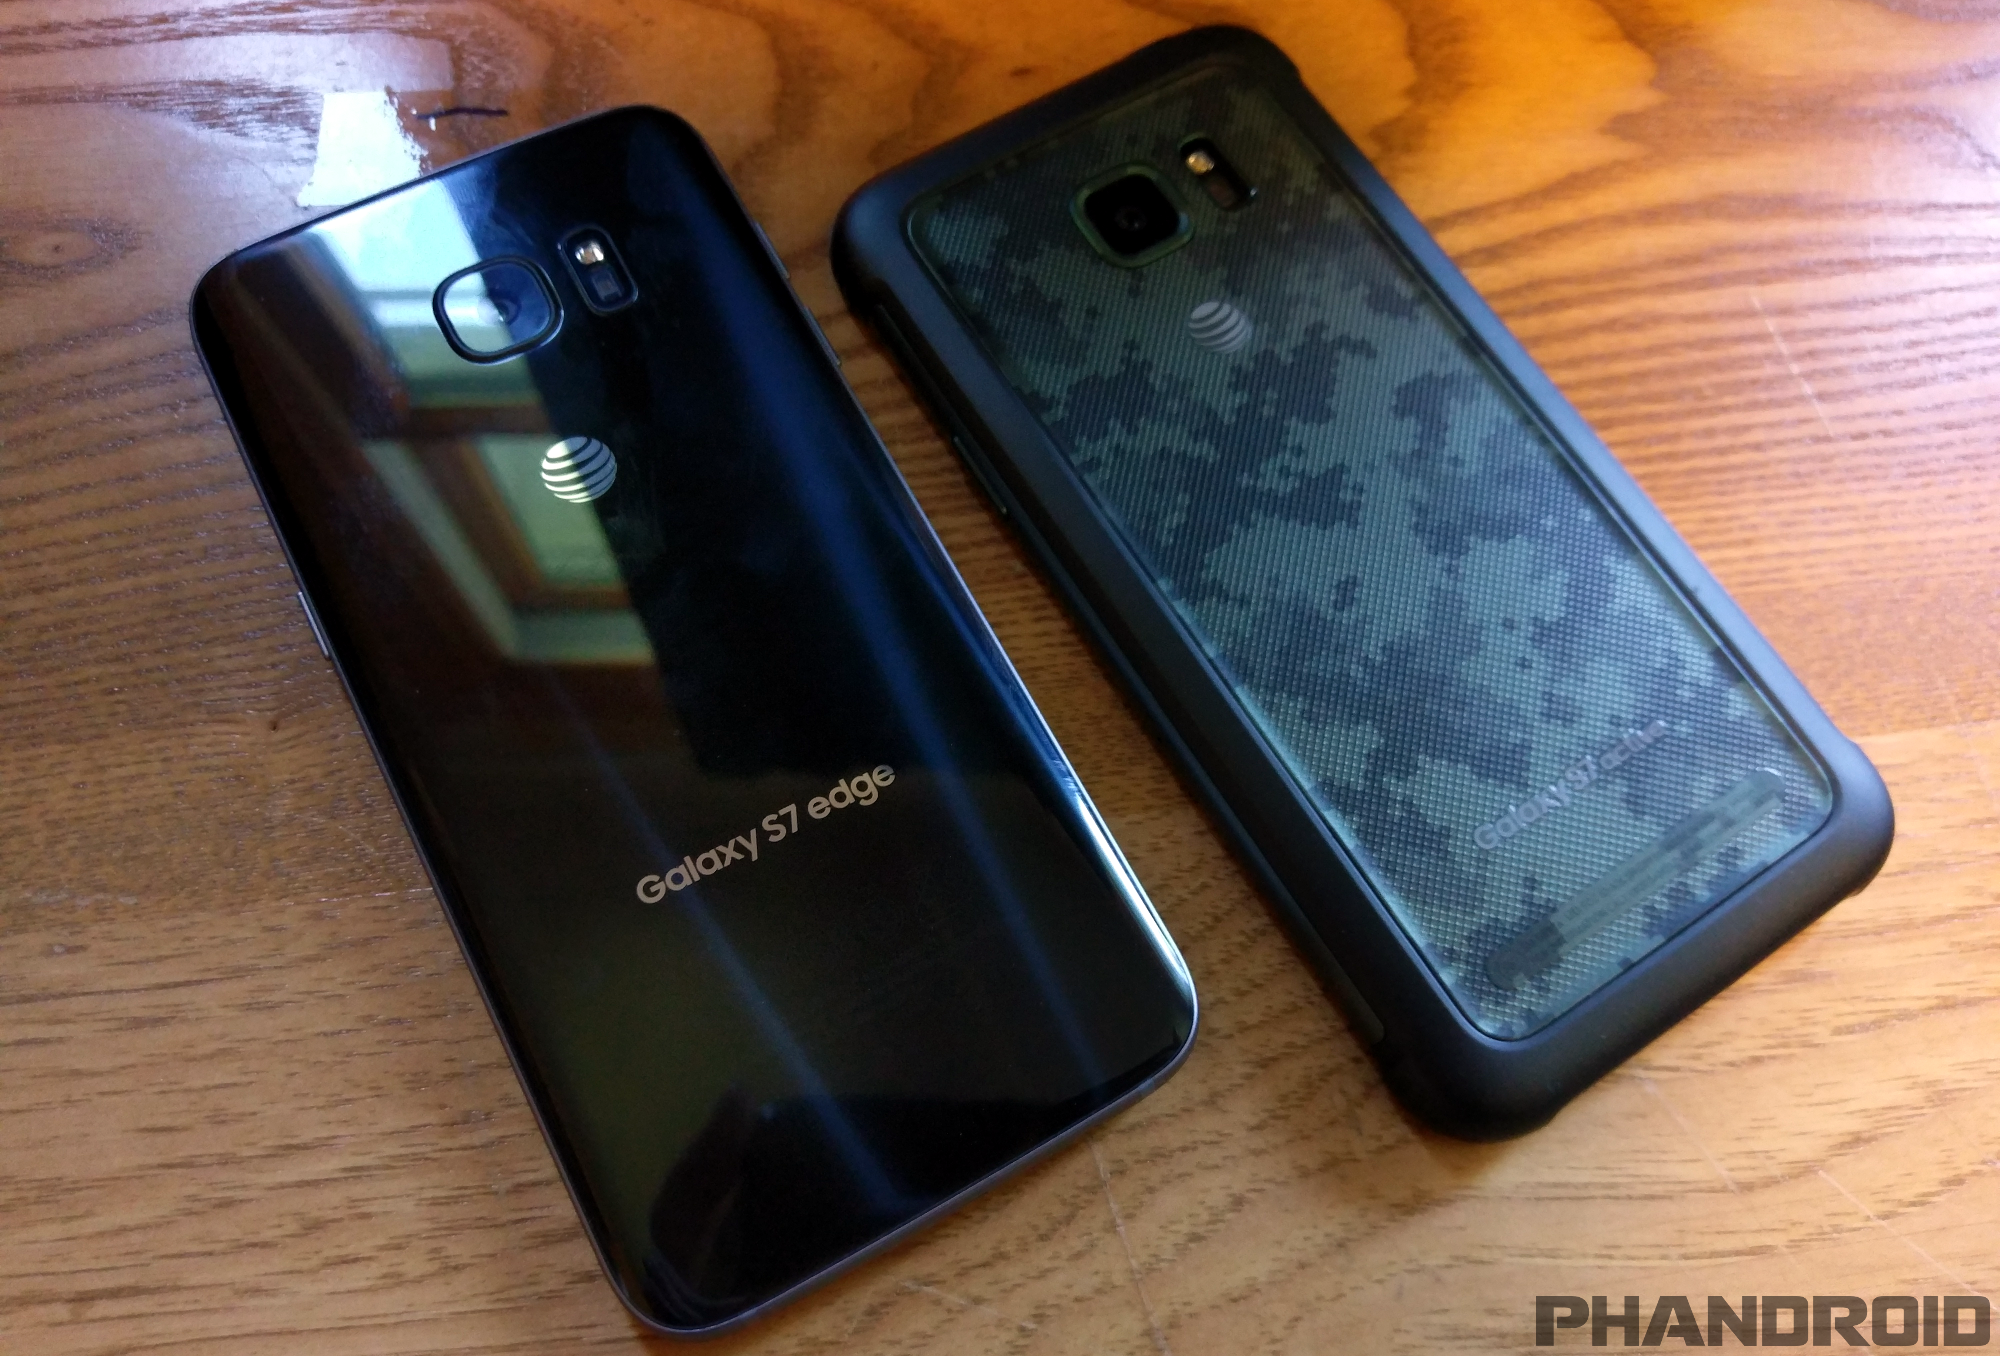 Reprimir Enorme exótico Samsung Galaxy S7 Active vs Galaxy S7 Edge: What's the difference? [VIDEO]  – Phandroid